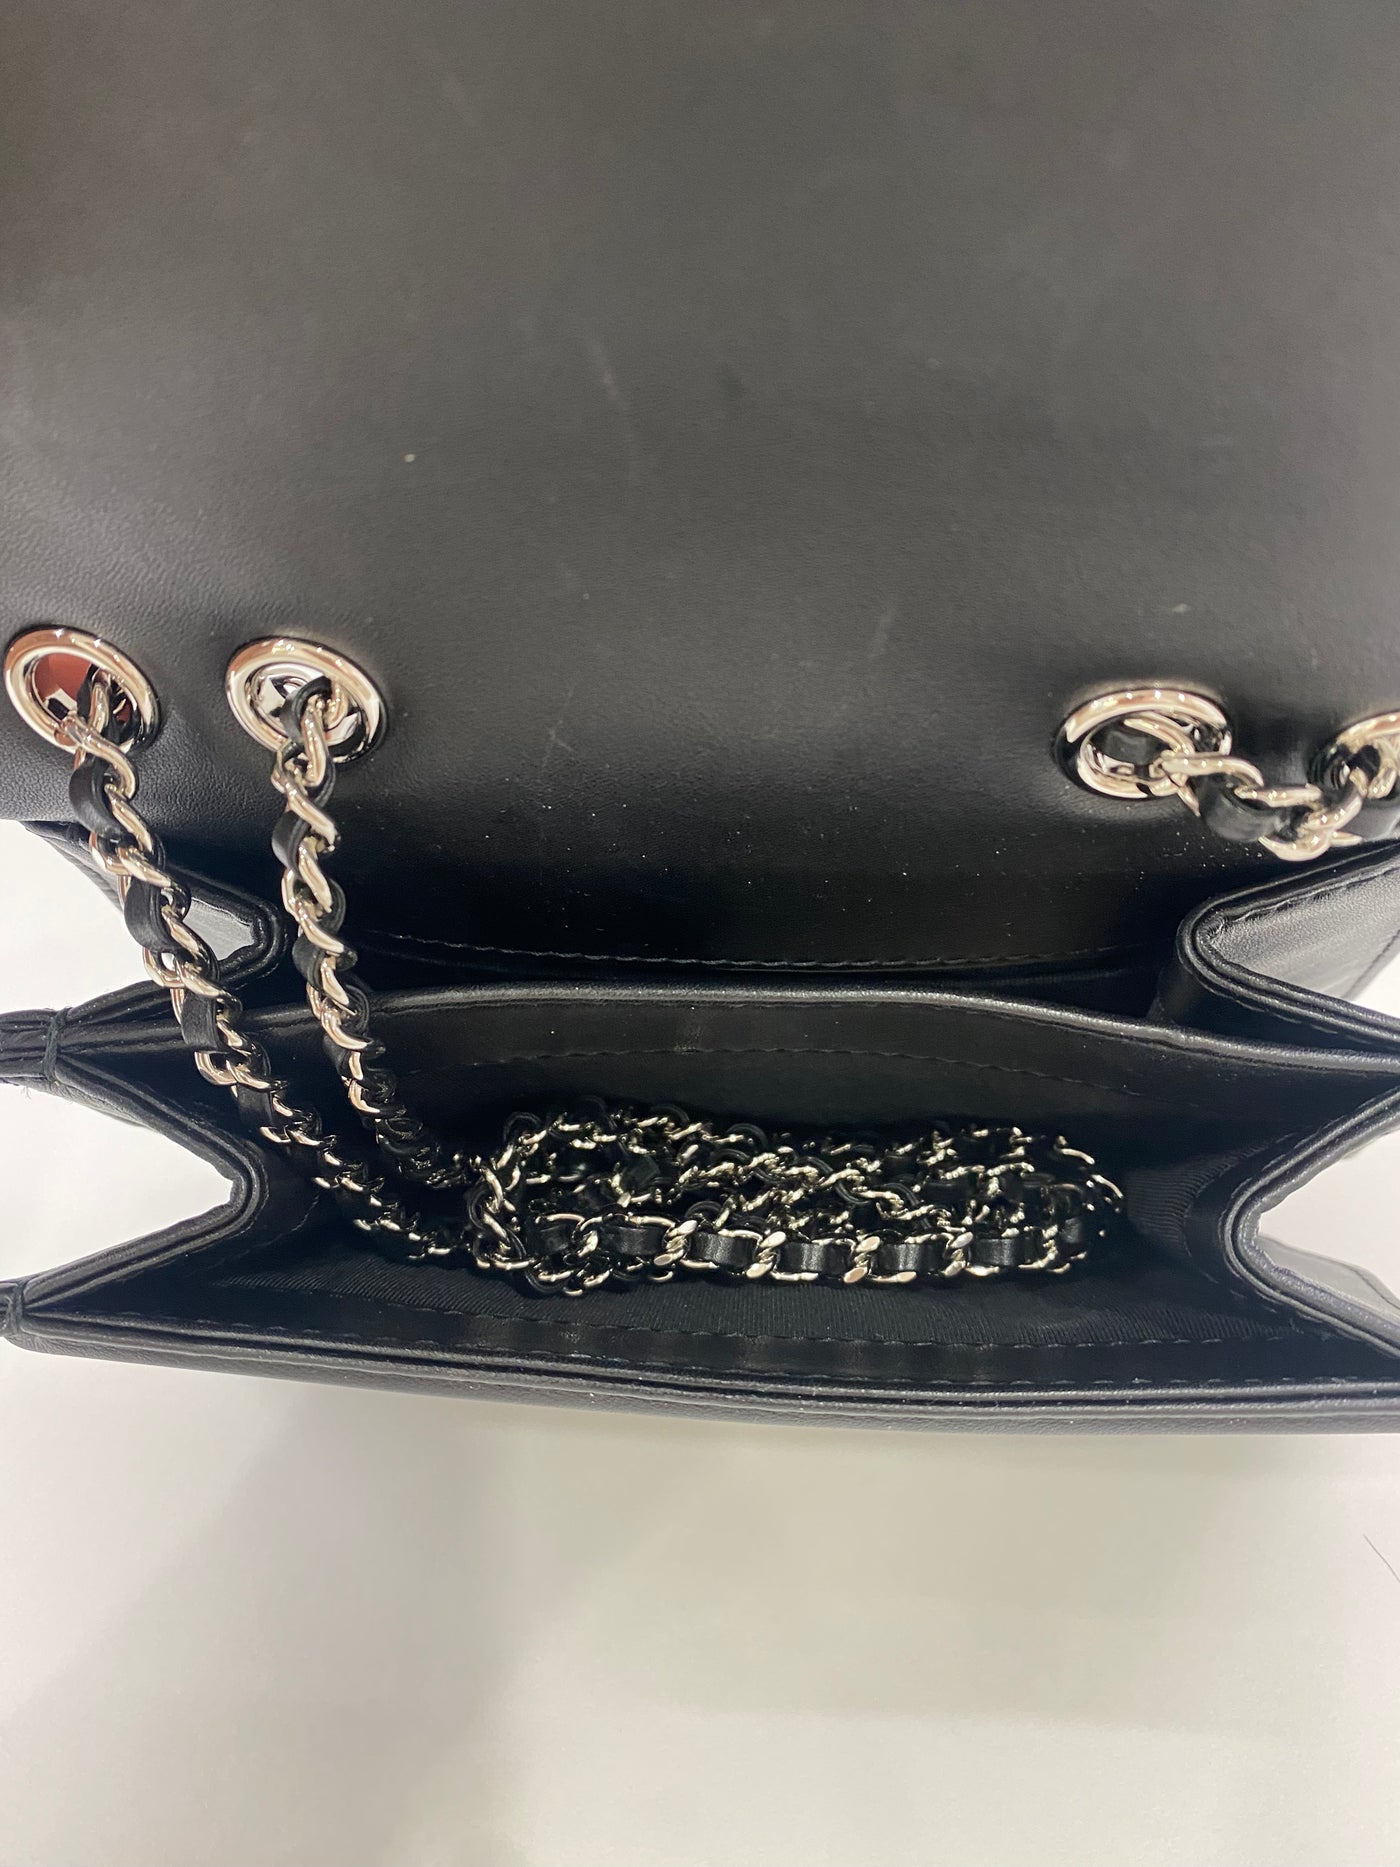 Chanel Black Crossbody Bag with Chain detailing